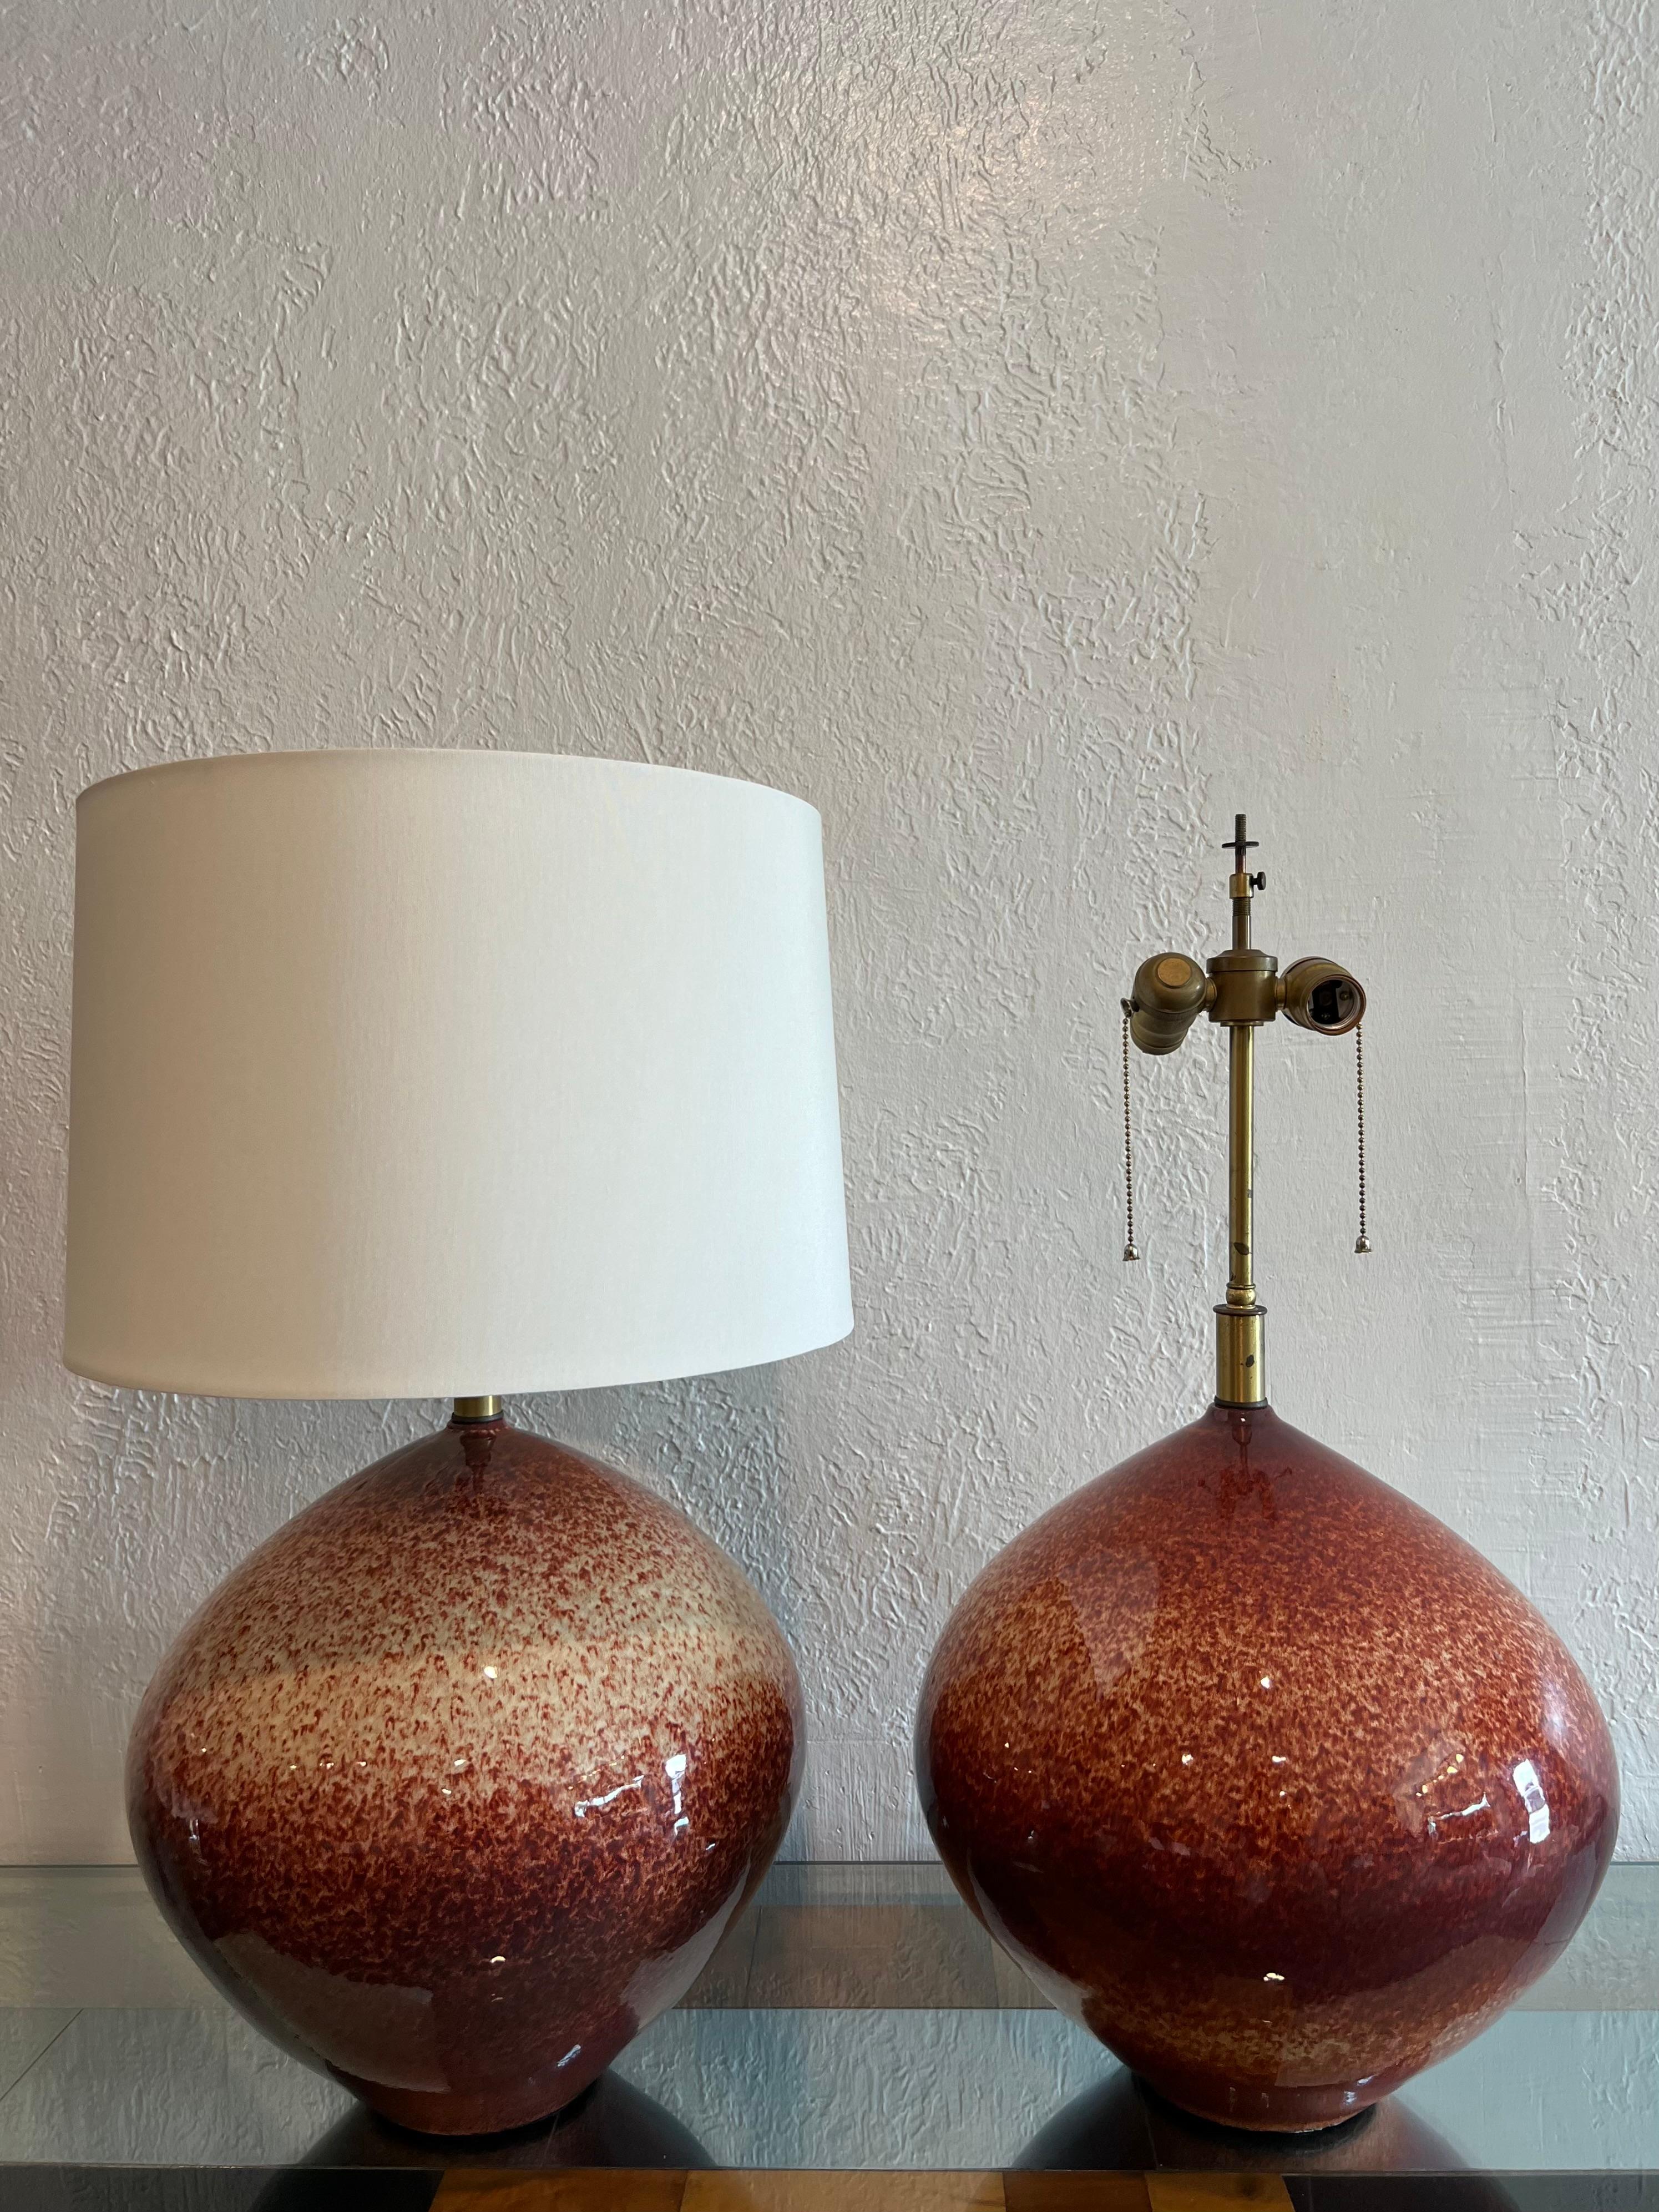 Rare pair of Leon Rosen for Design Technics table lamps. Each lamp has its own unique splatter pattern. Found in working order with original wiring and hardware. The lamps have been fitted with new drum shades. Measurements with shades are: 16D x